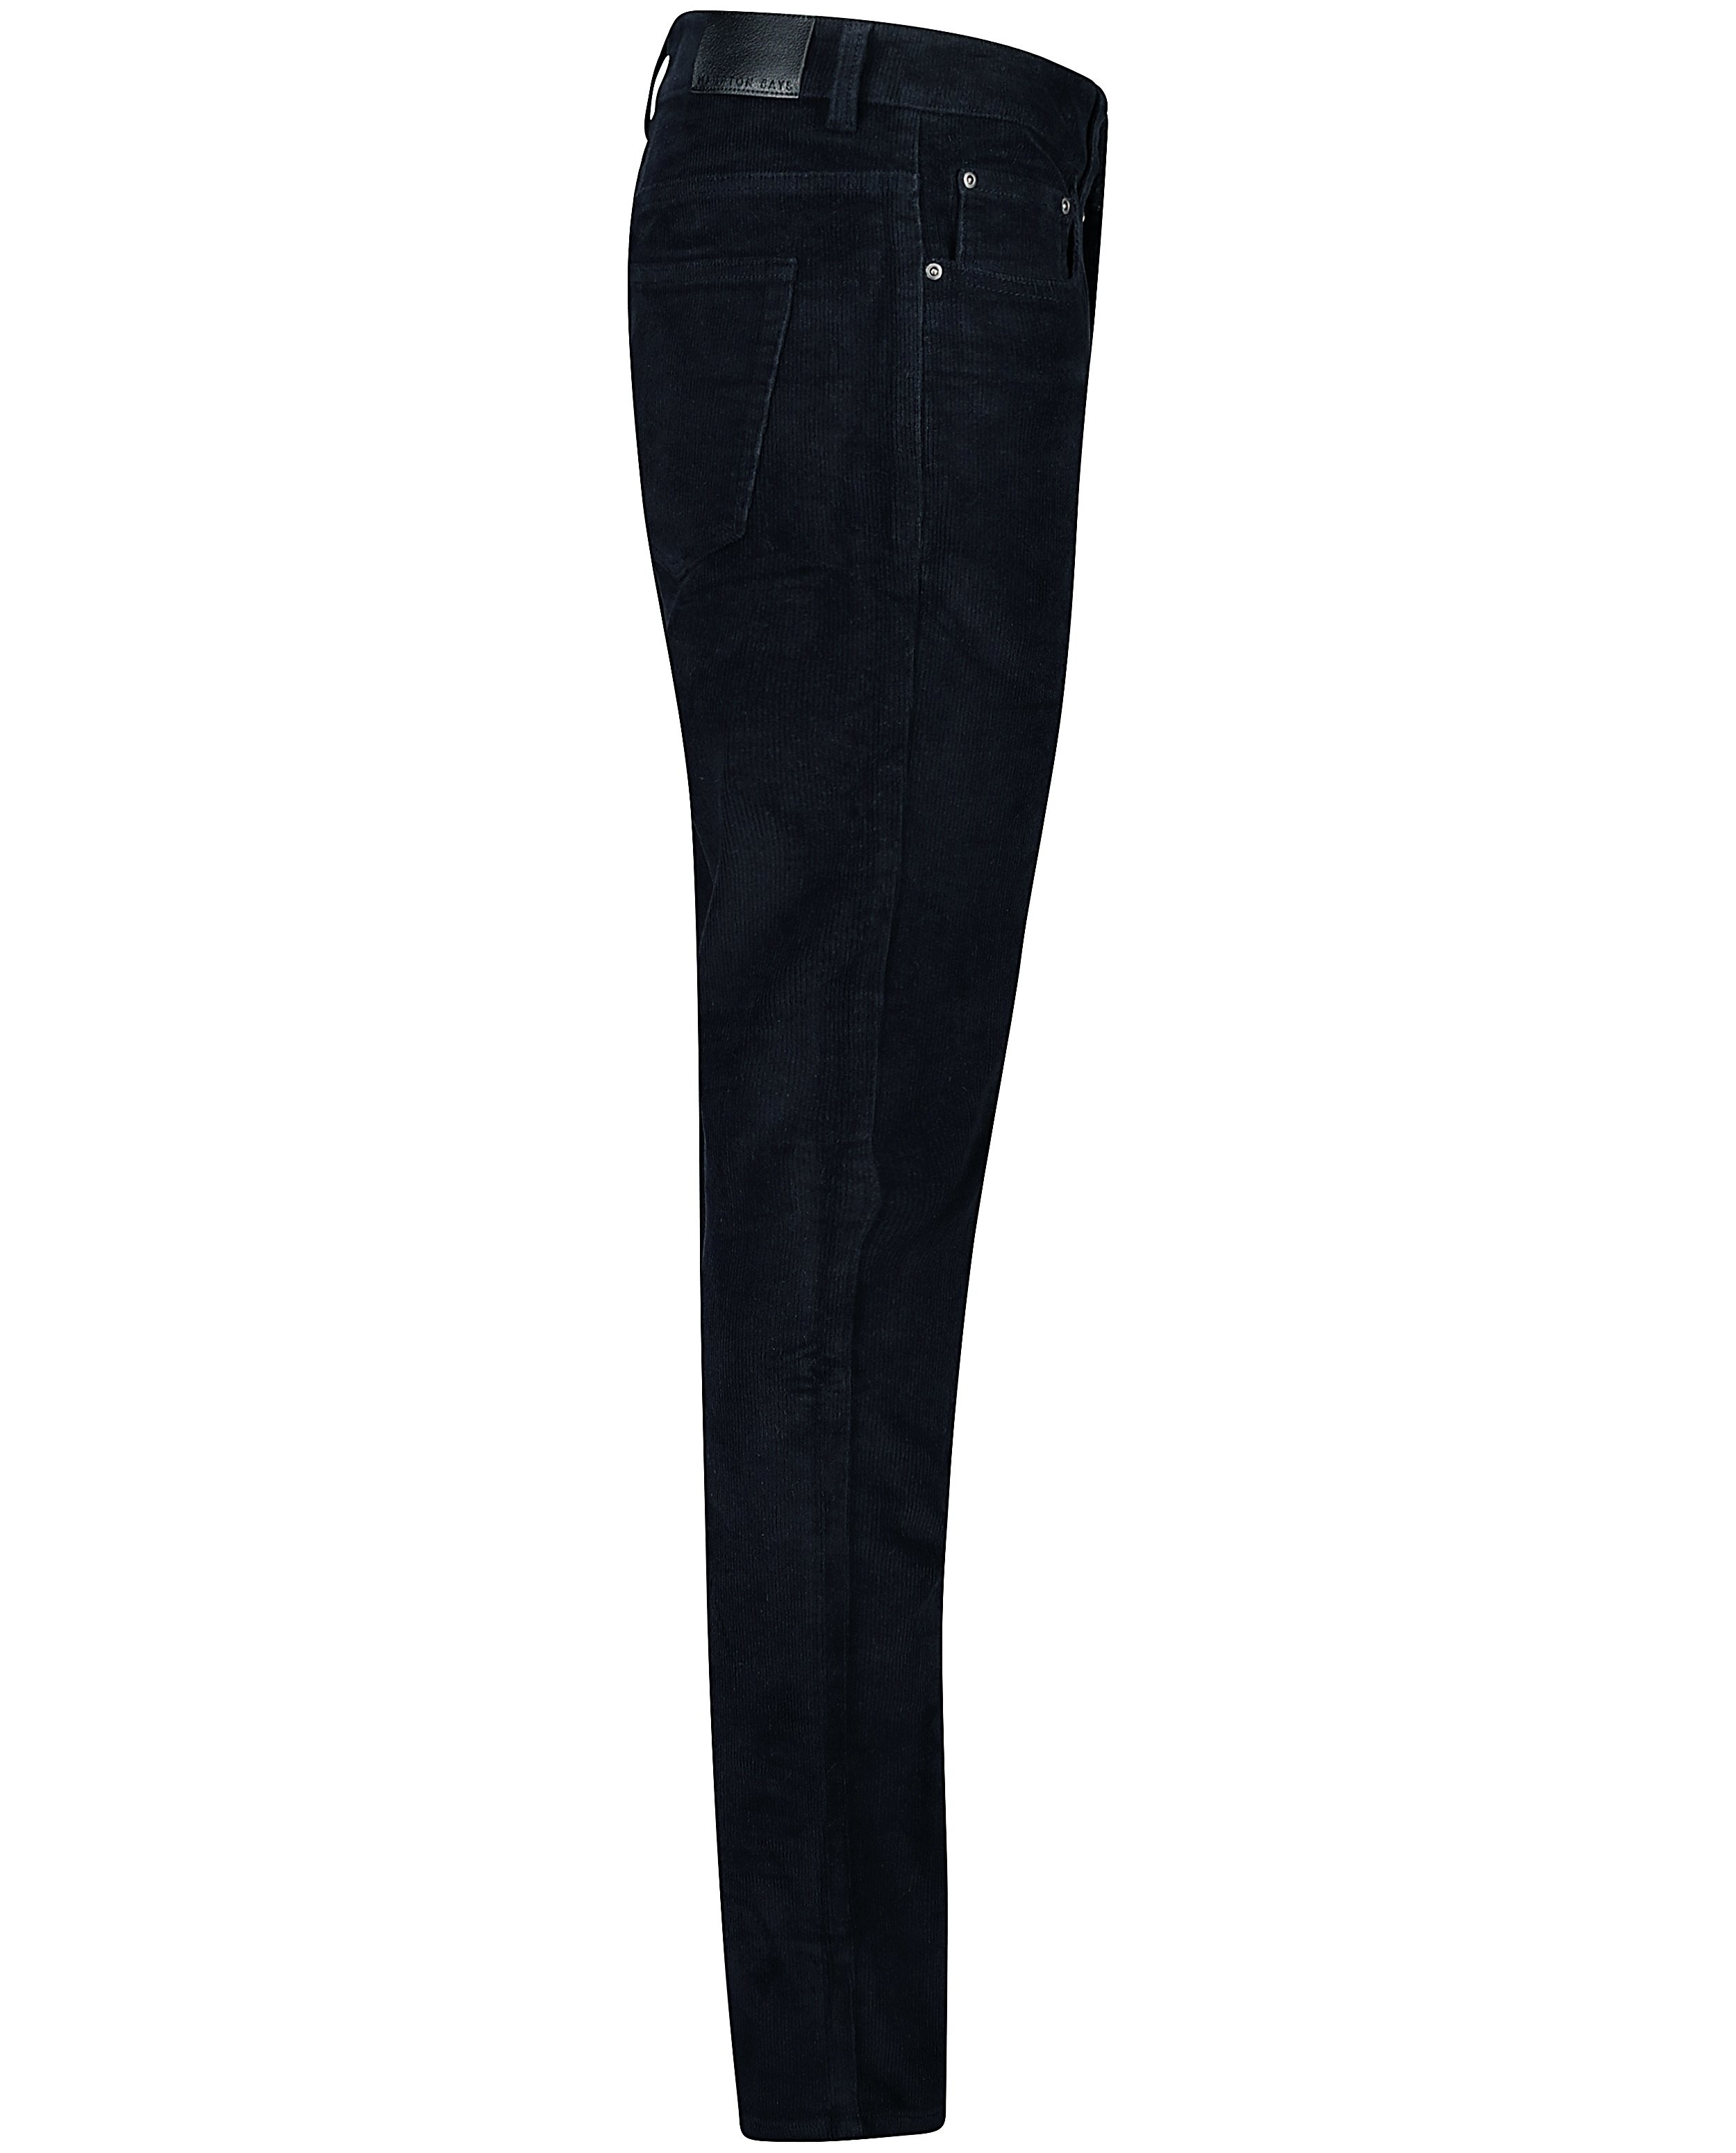 Pantalons - Jeans straight fit